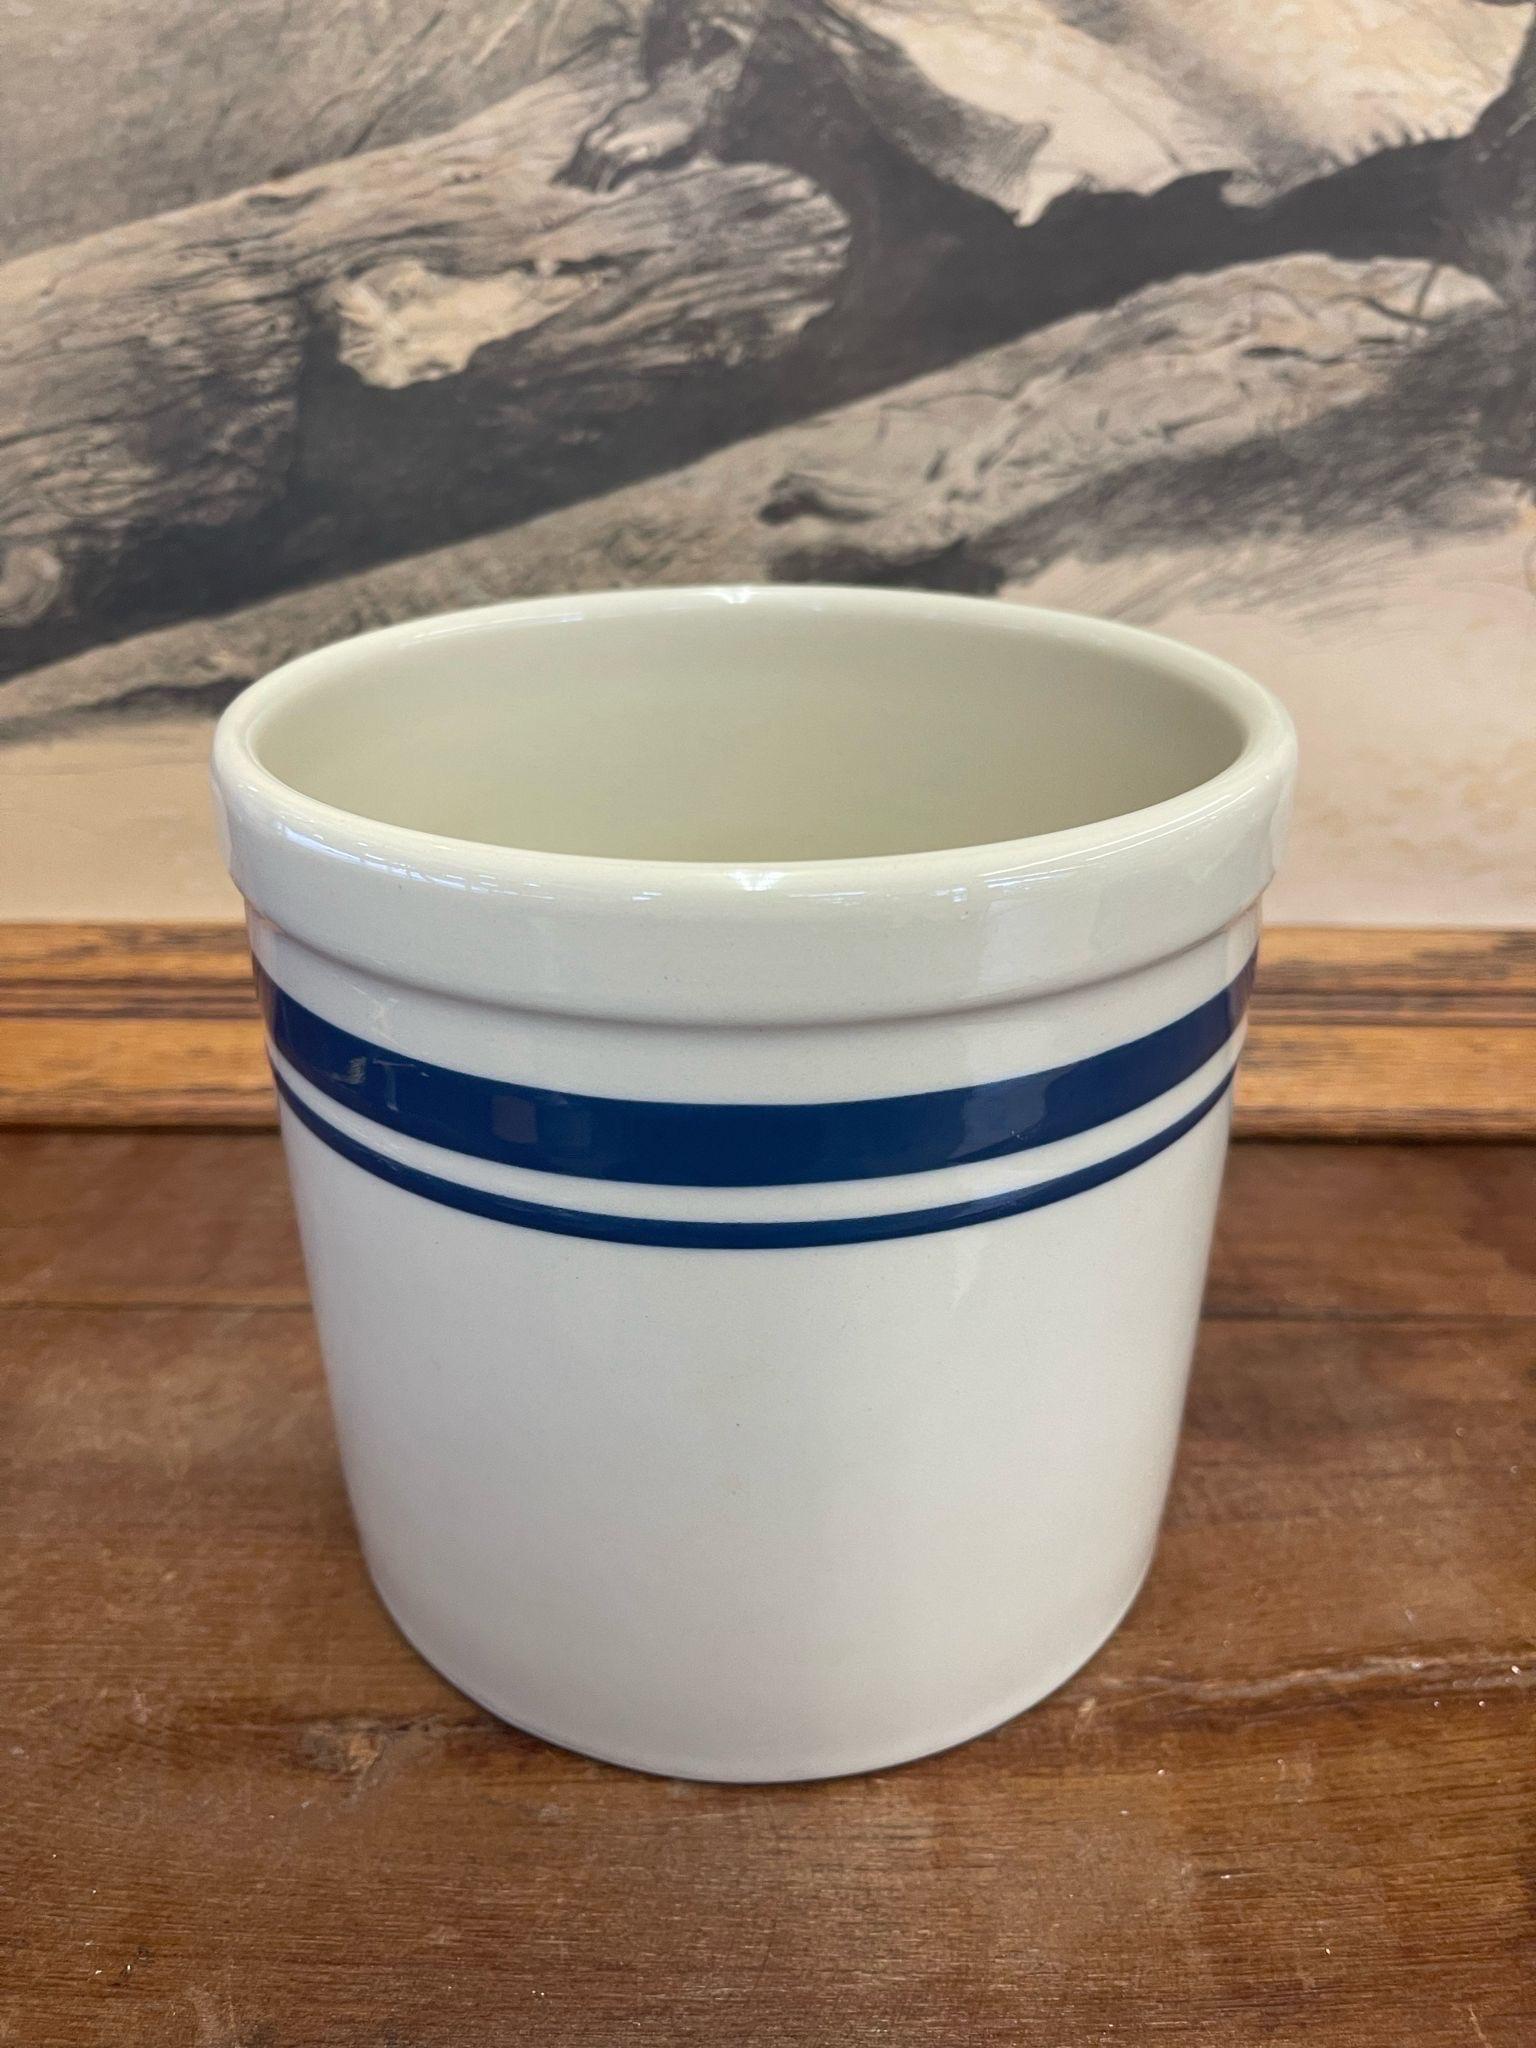 Late 20th Century Vintage White and Blue Colored Ceramic Jar.